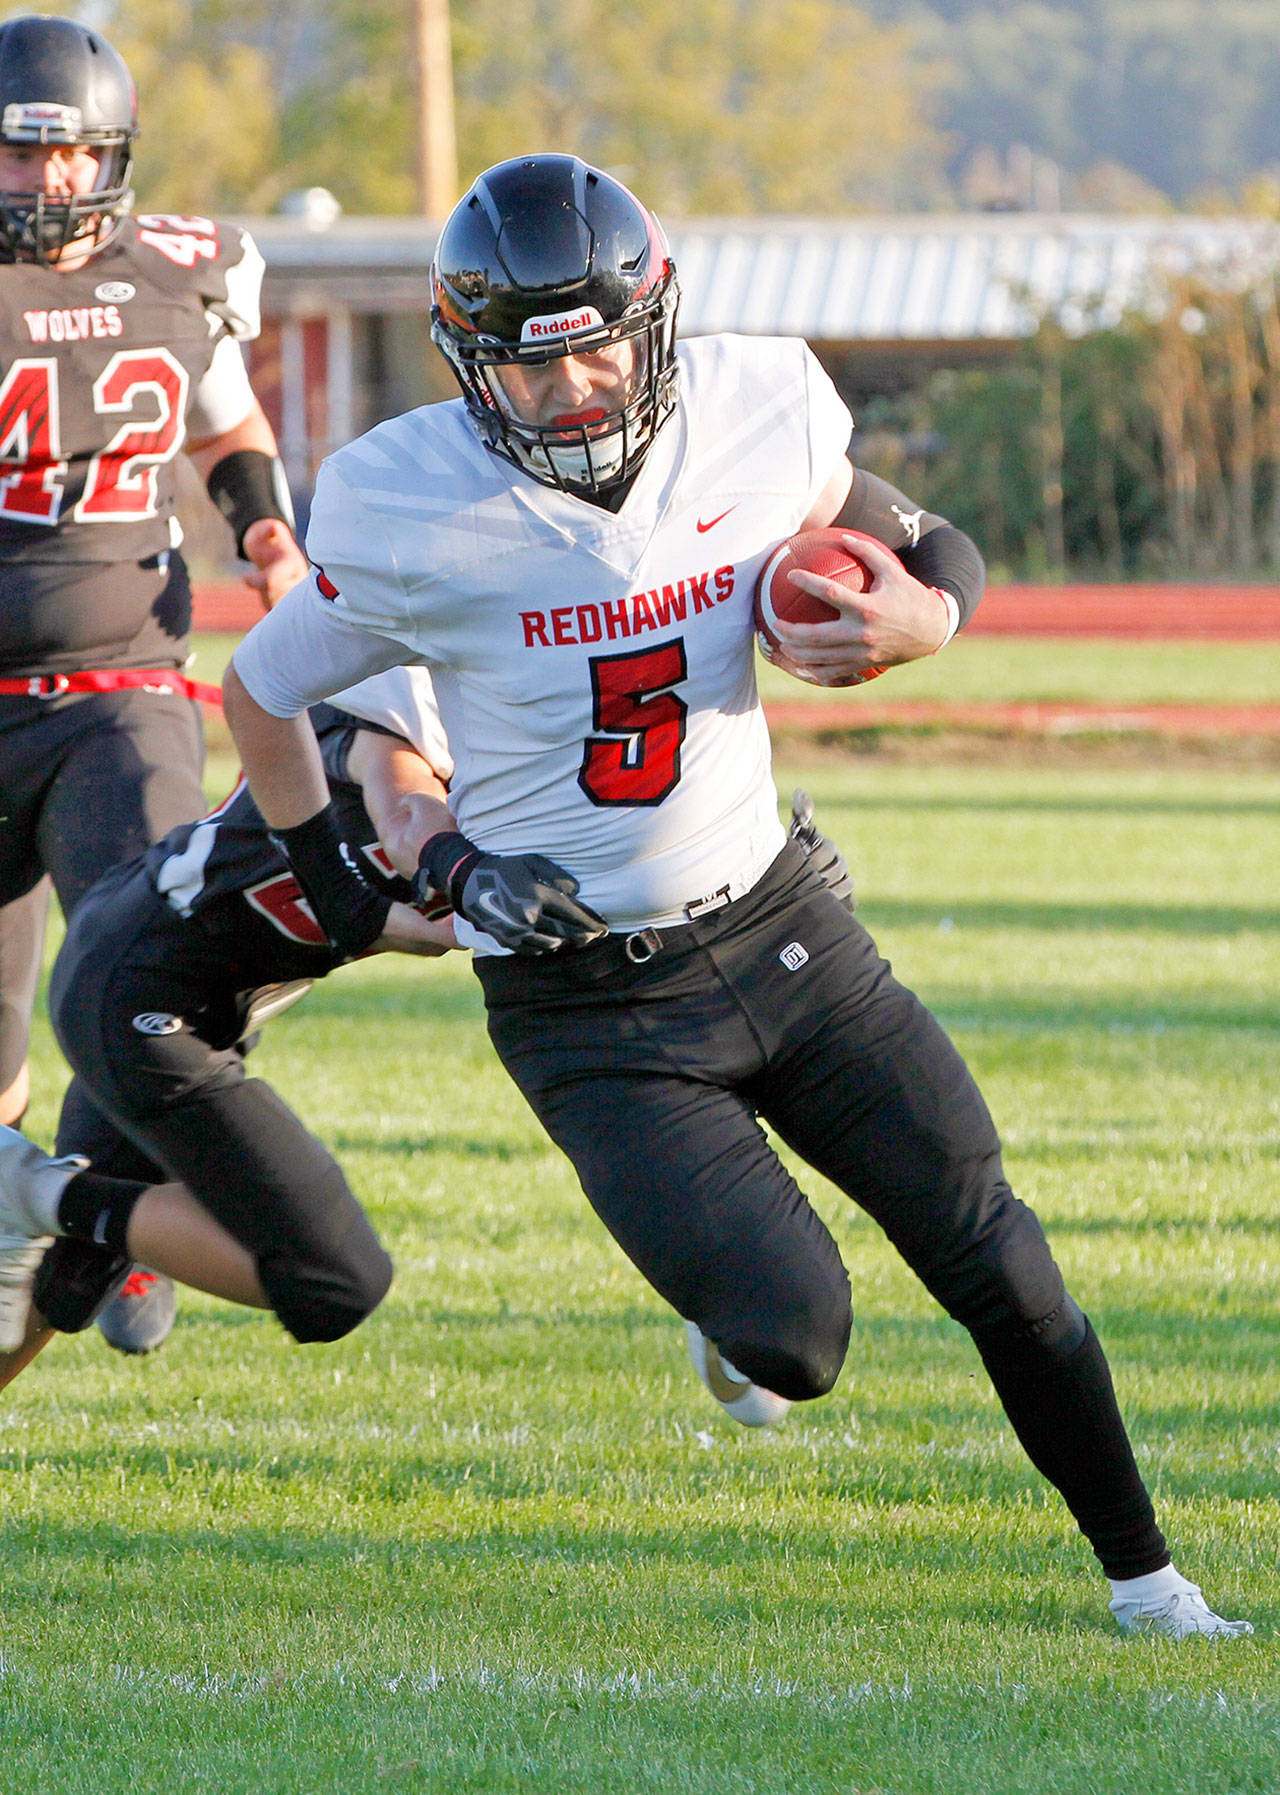 Port Townsend senior Noa Apker-Montoya runs with the football during the Redhawks 49-16 win over Coupeville last Fall. Apker-Montoya was a four-year starter on the Port Townsend football and basketball teams and also played baseball and golf. (Lisa Jensen)